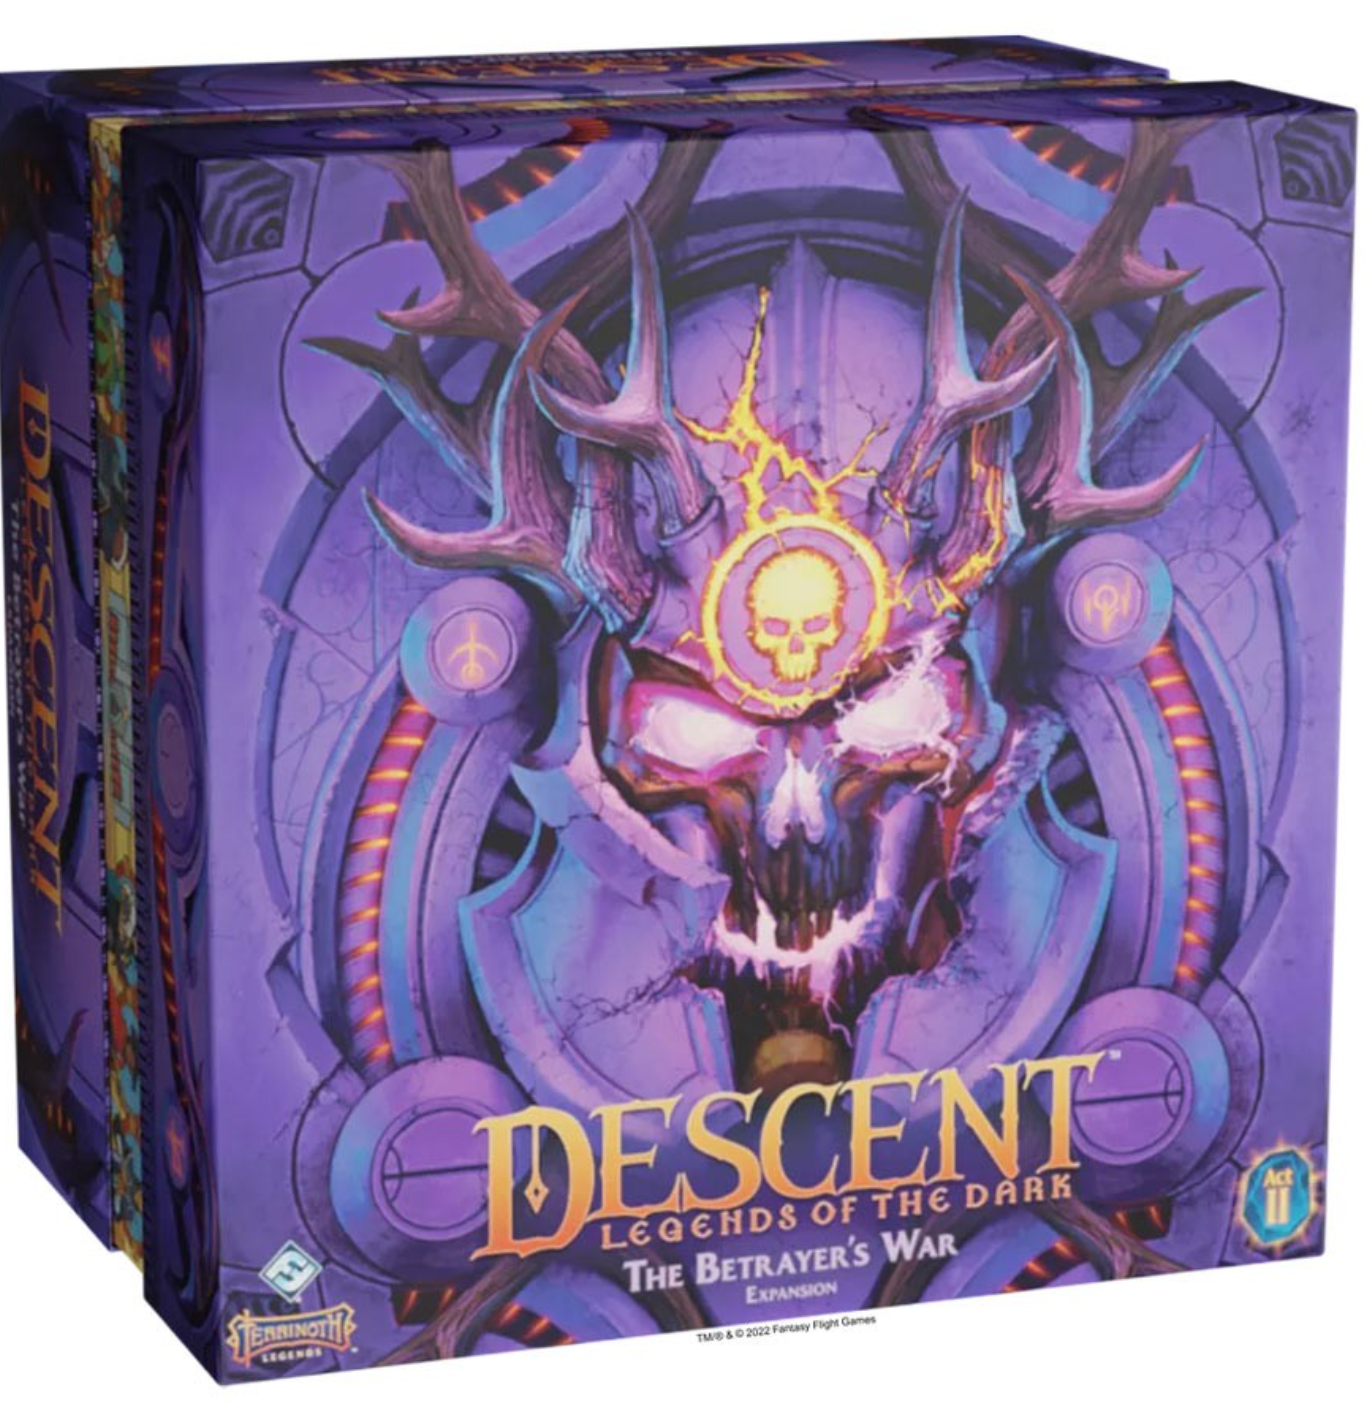 Descent: Legends of the Dark - The Betrayer's War Expansion